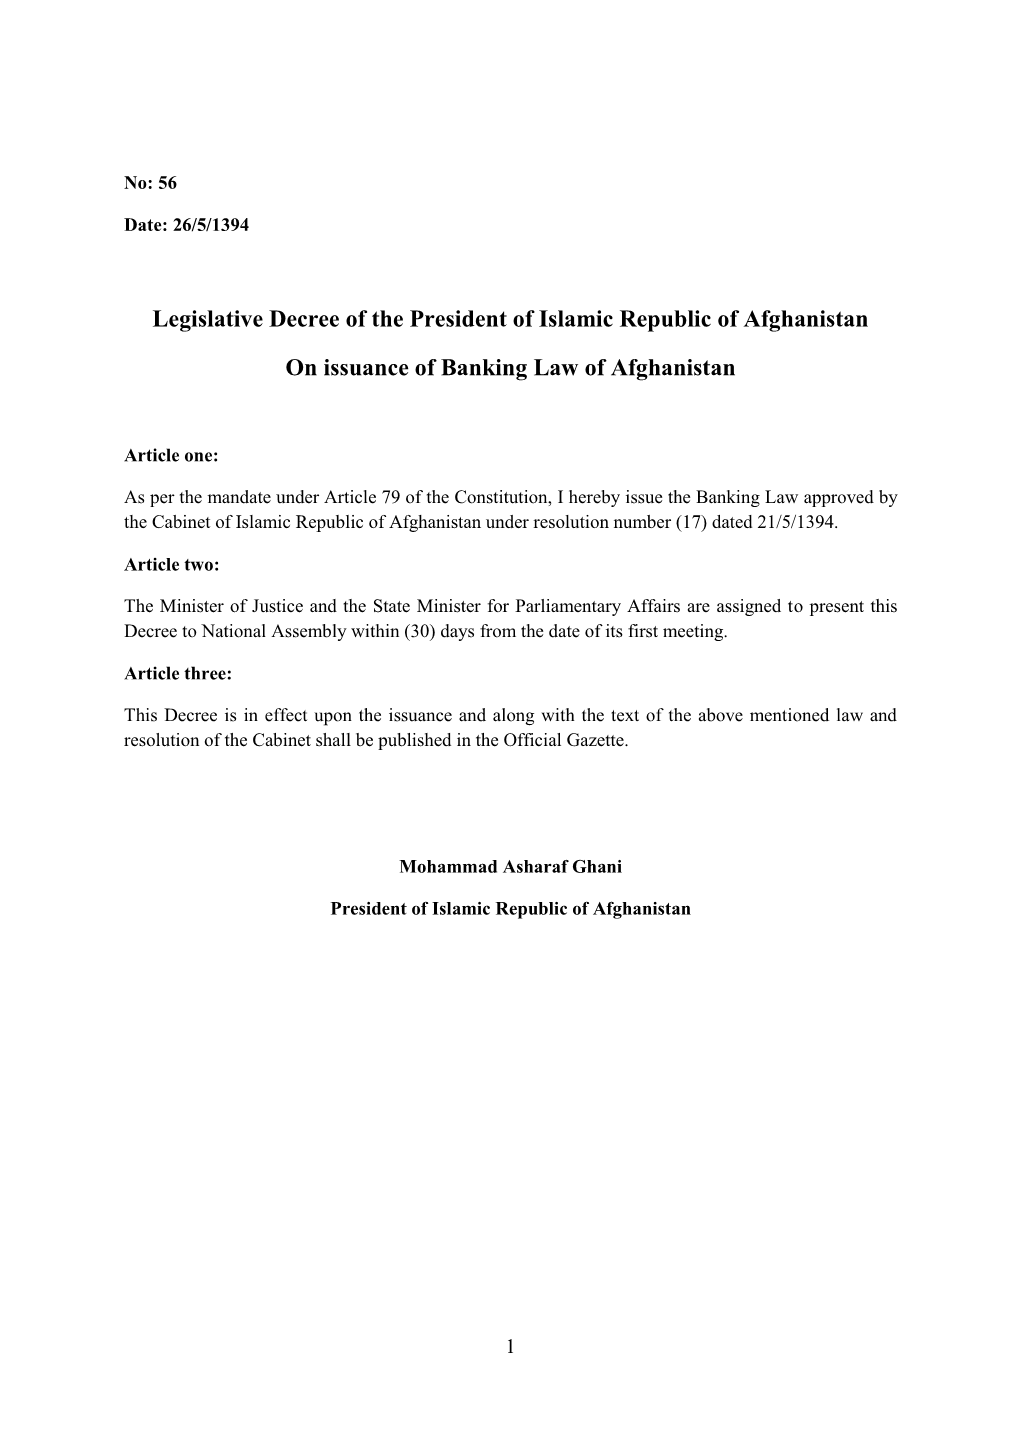 Legislative Decree of the President of Islamic Republic of Afghanistan on Issuance of Banking Law of Afghanistan